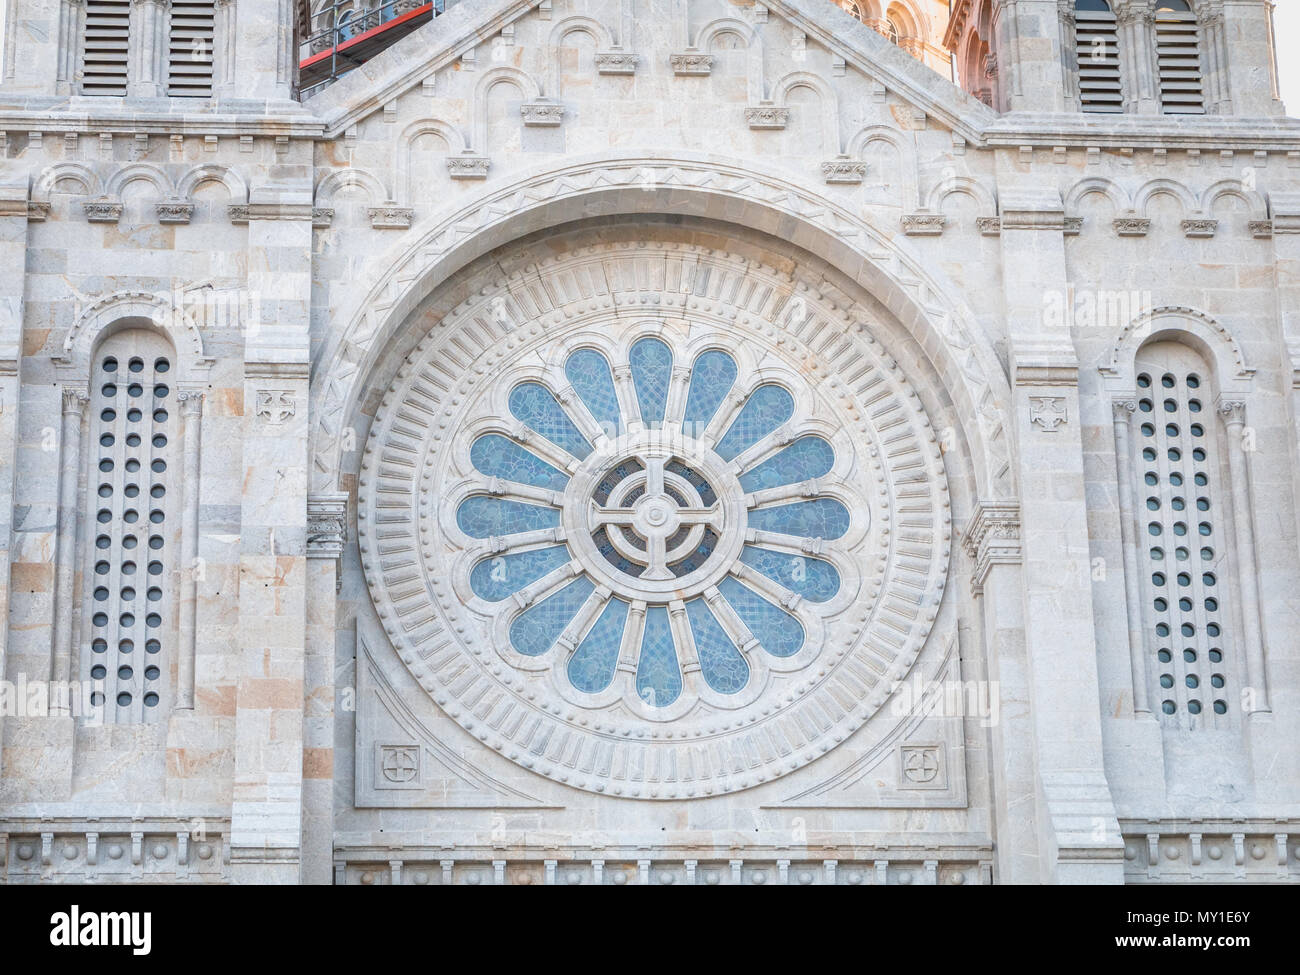 architectural detail of Santa Luzia basilica in Viana do Castelo in northern Portugal on a spring day Stock Photo